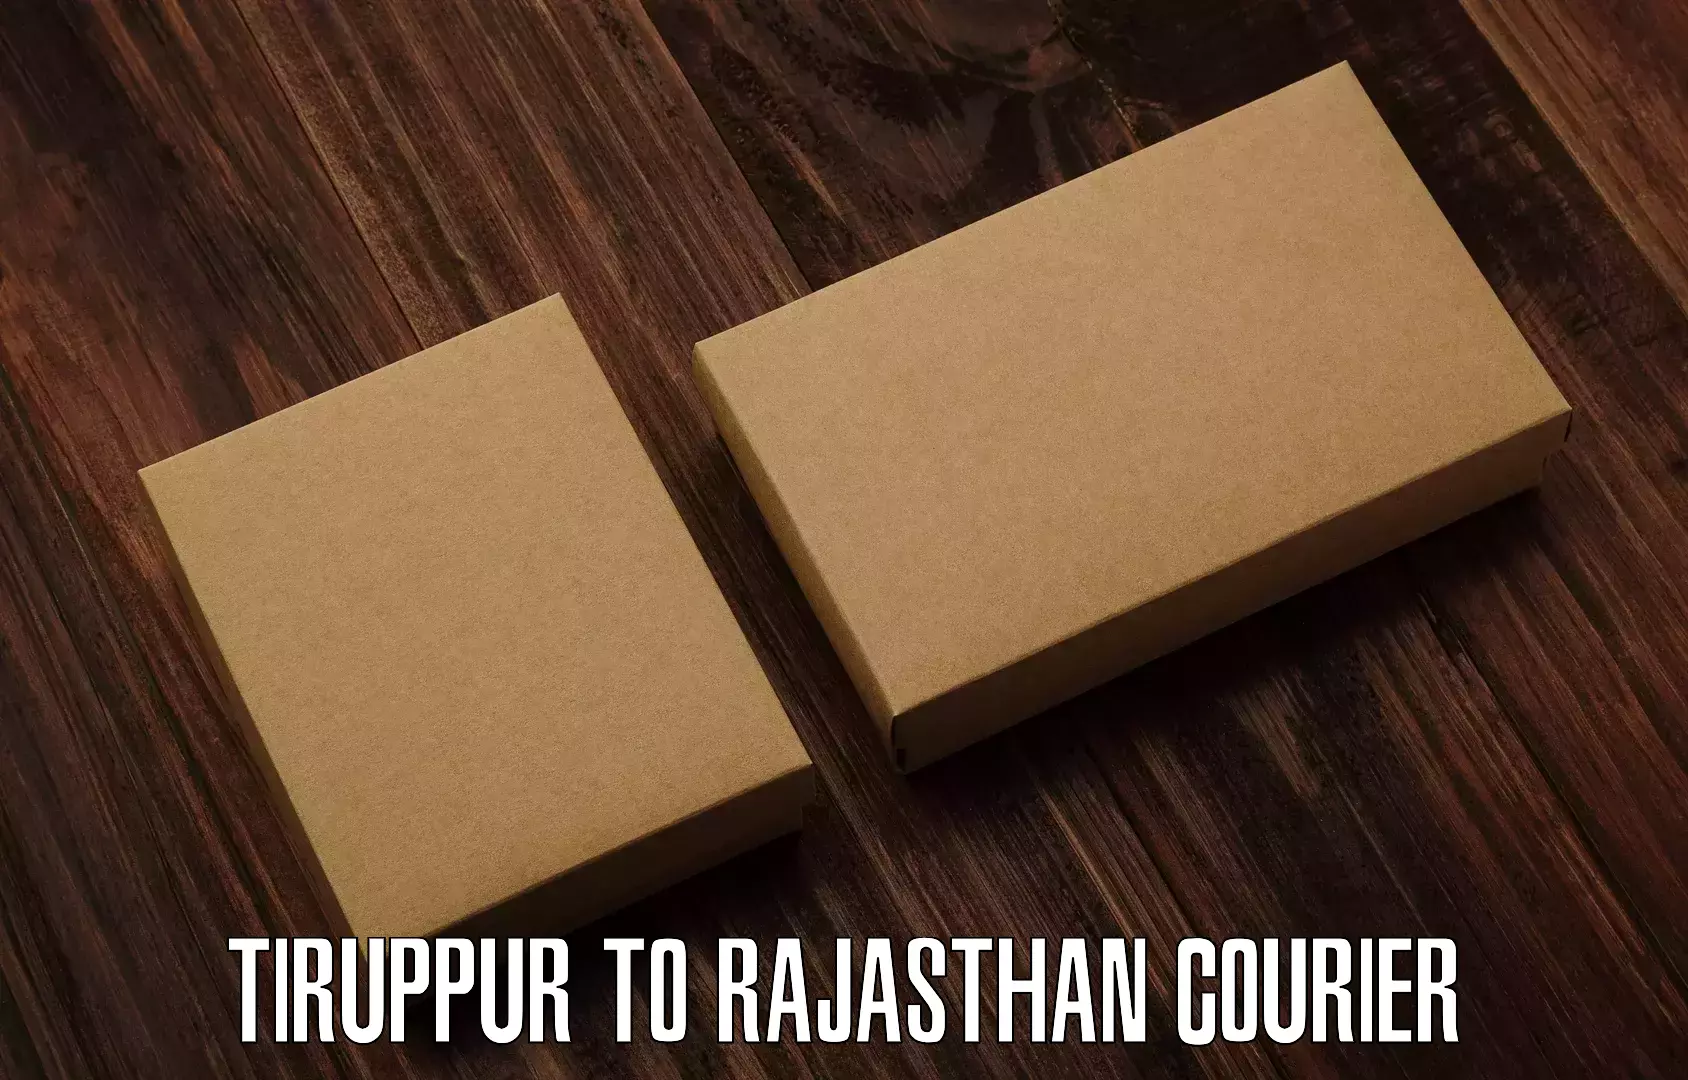 Easy return solutions Tiruppur to Rajasthan